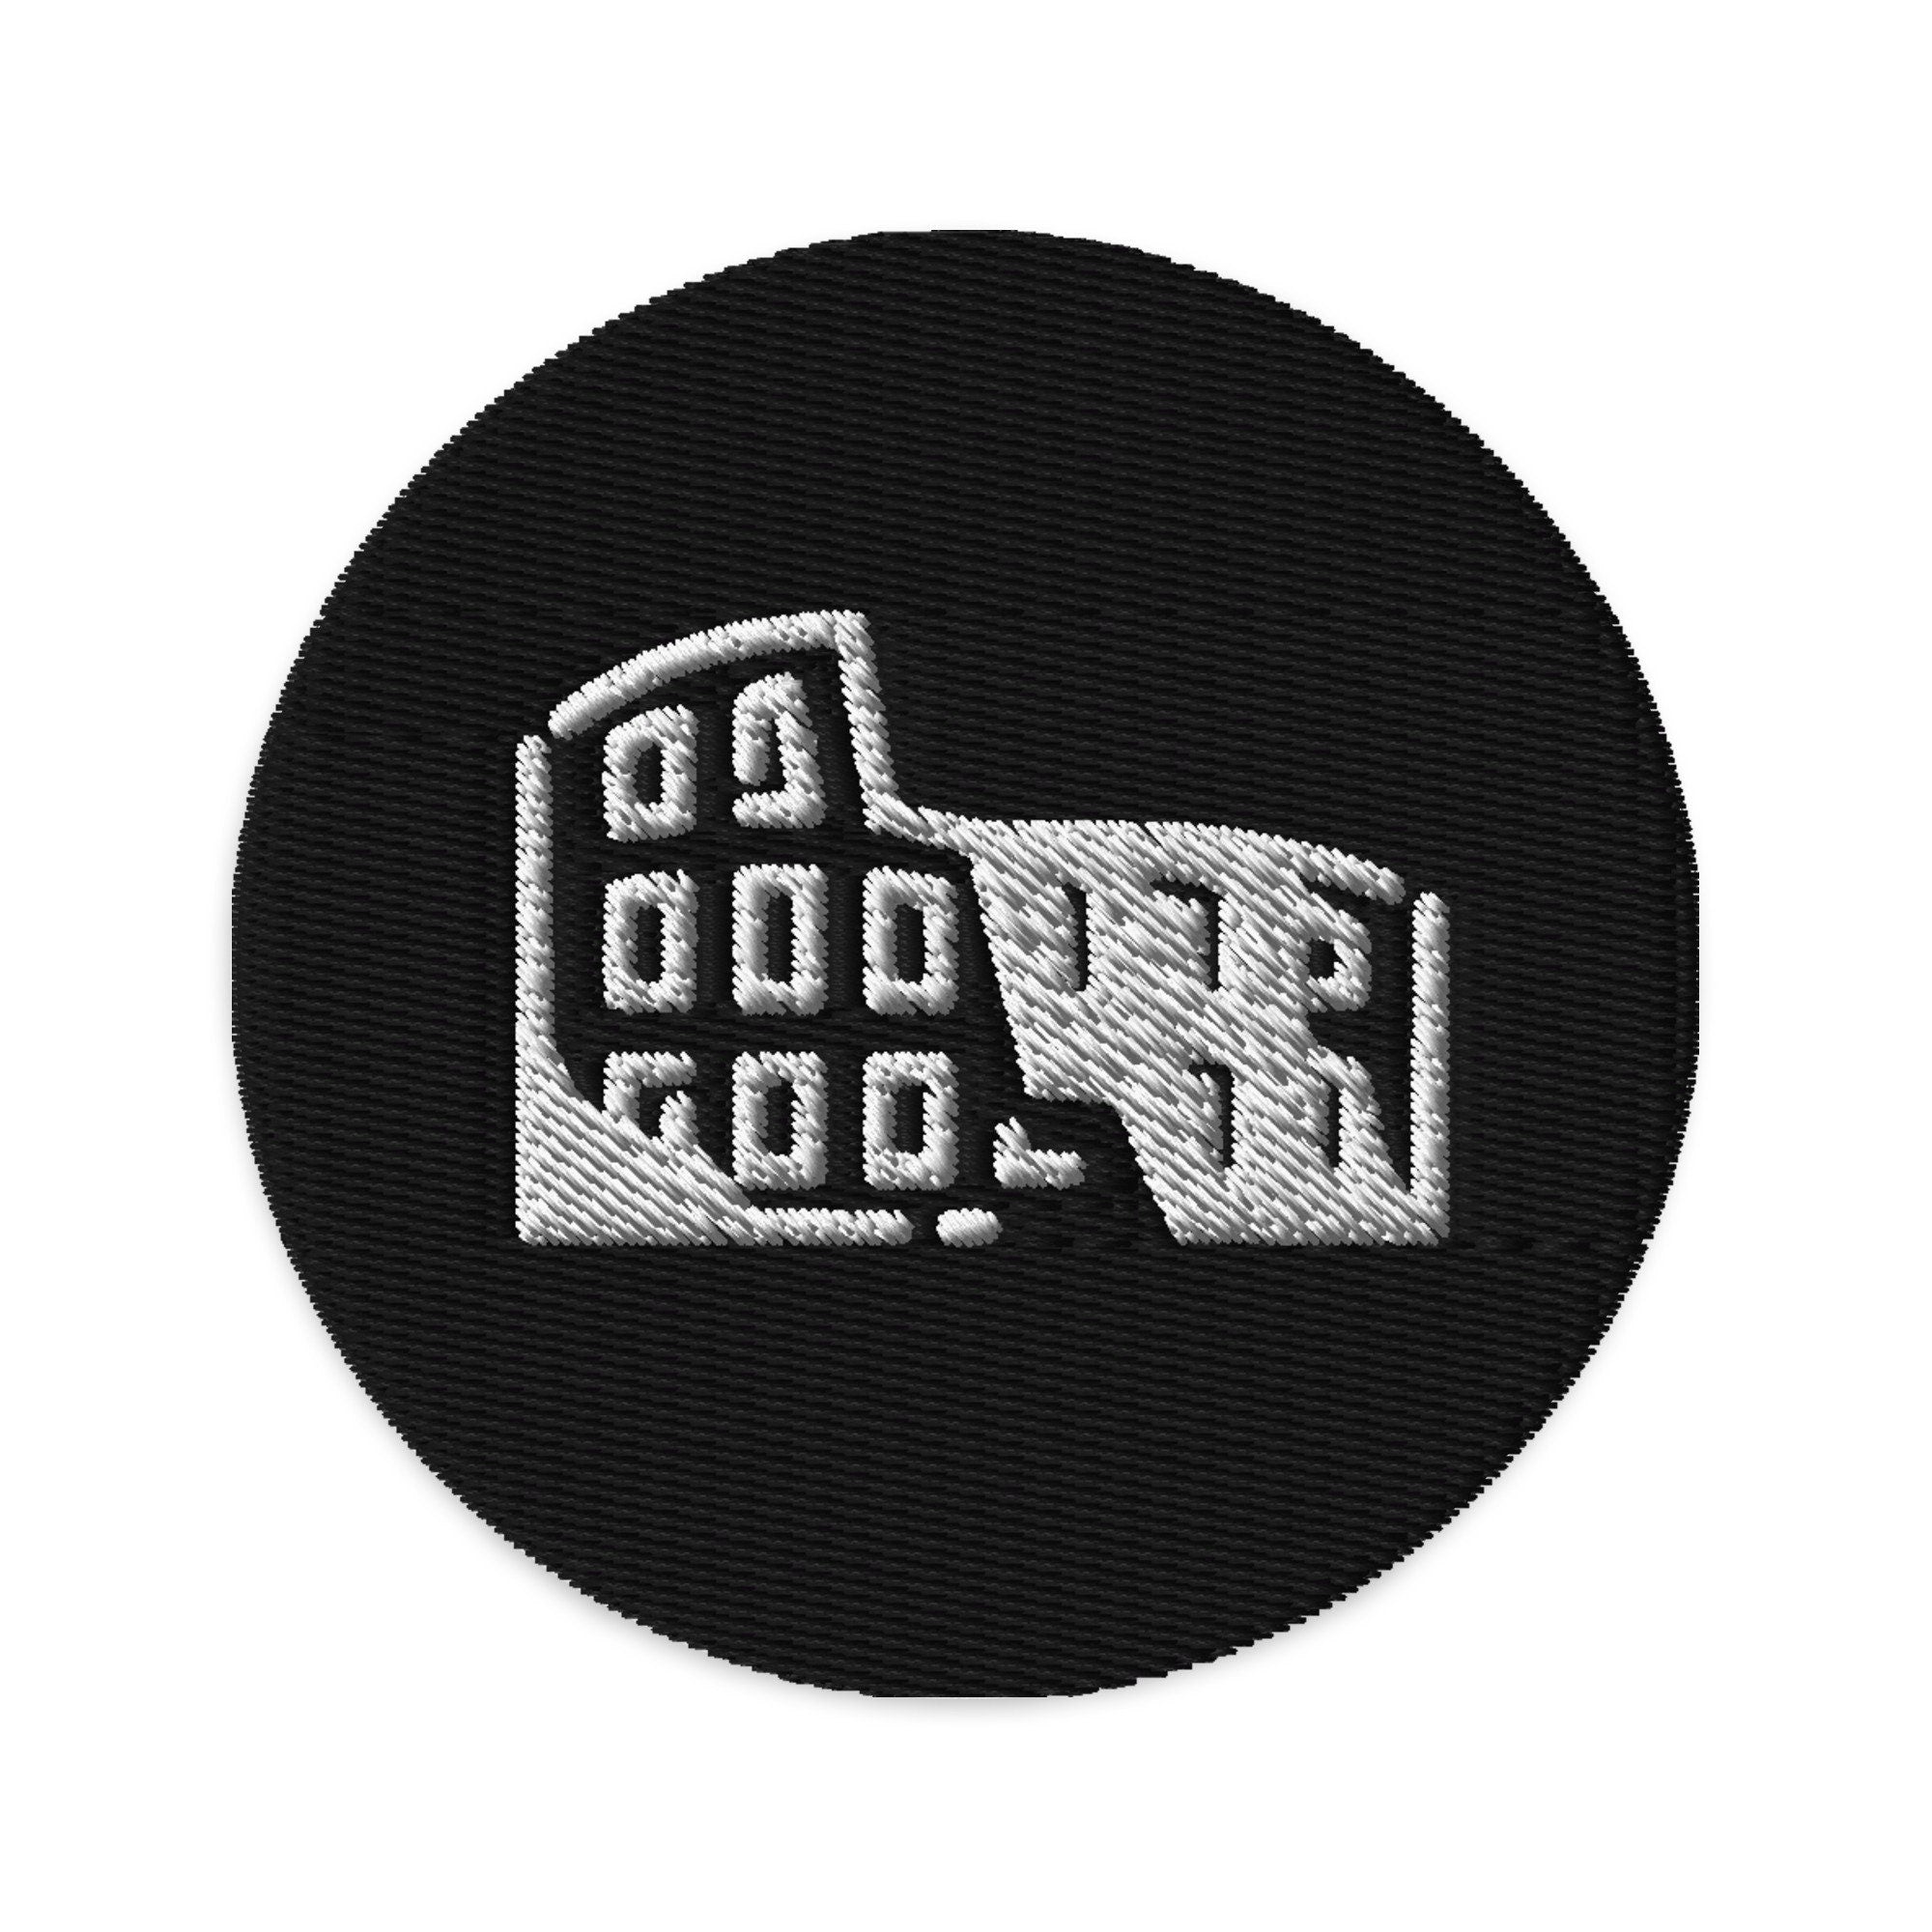 The Colosseum Embroidered Patch, Handmade The Colosseum Patches, Three Inch Colosseum Embroidery